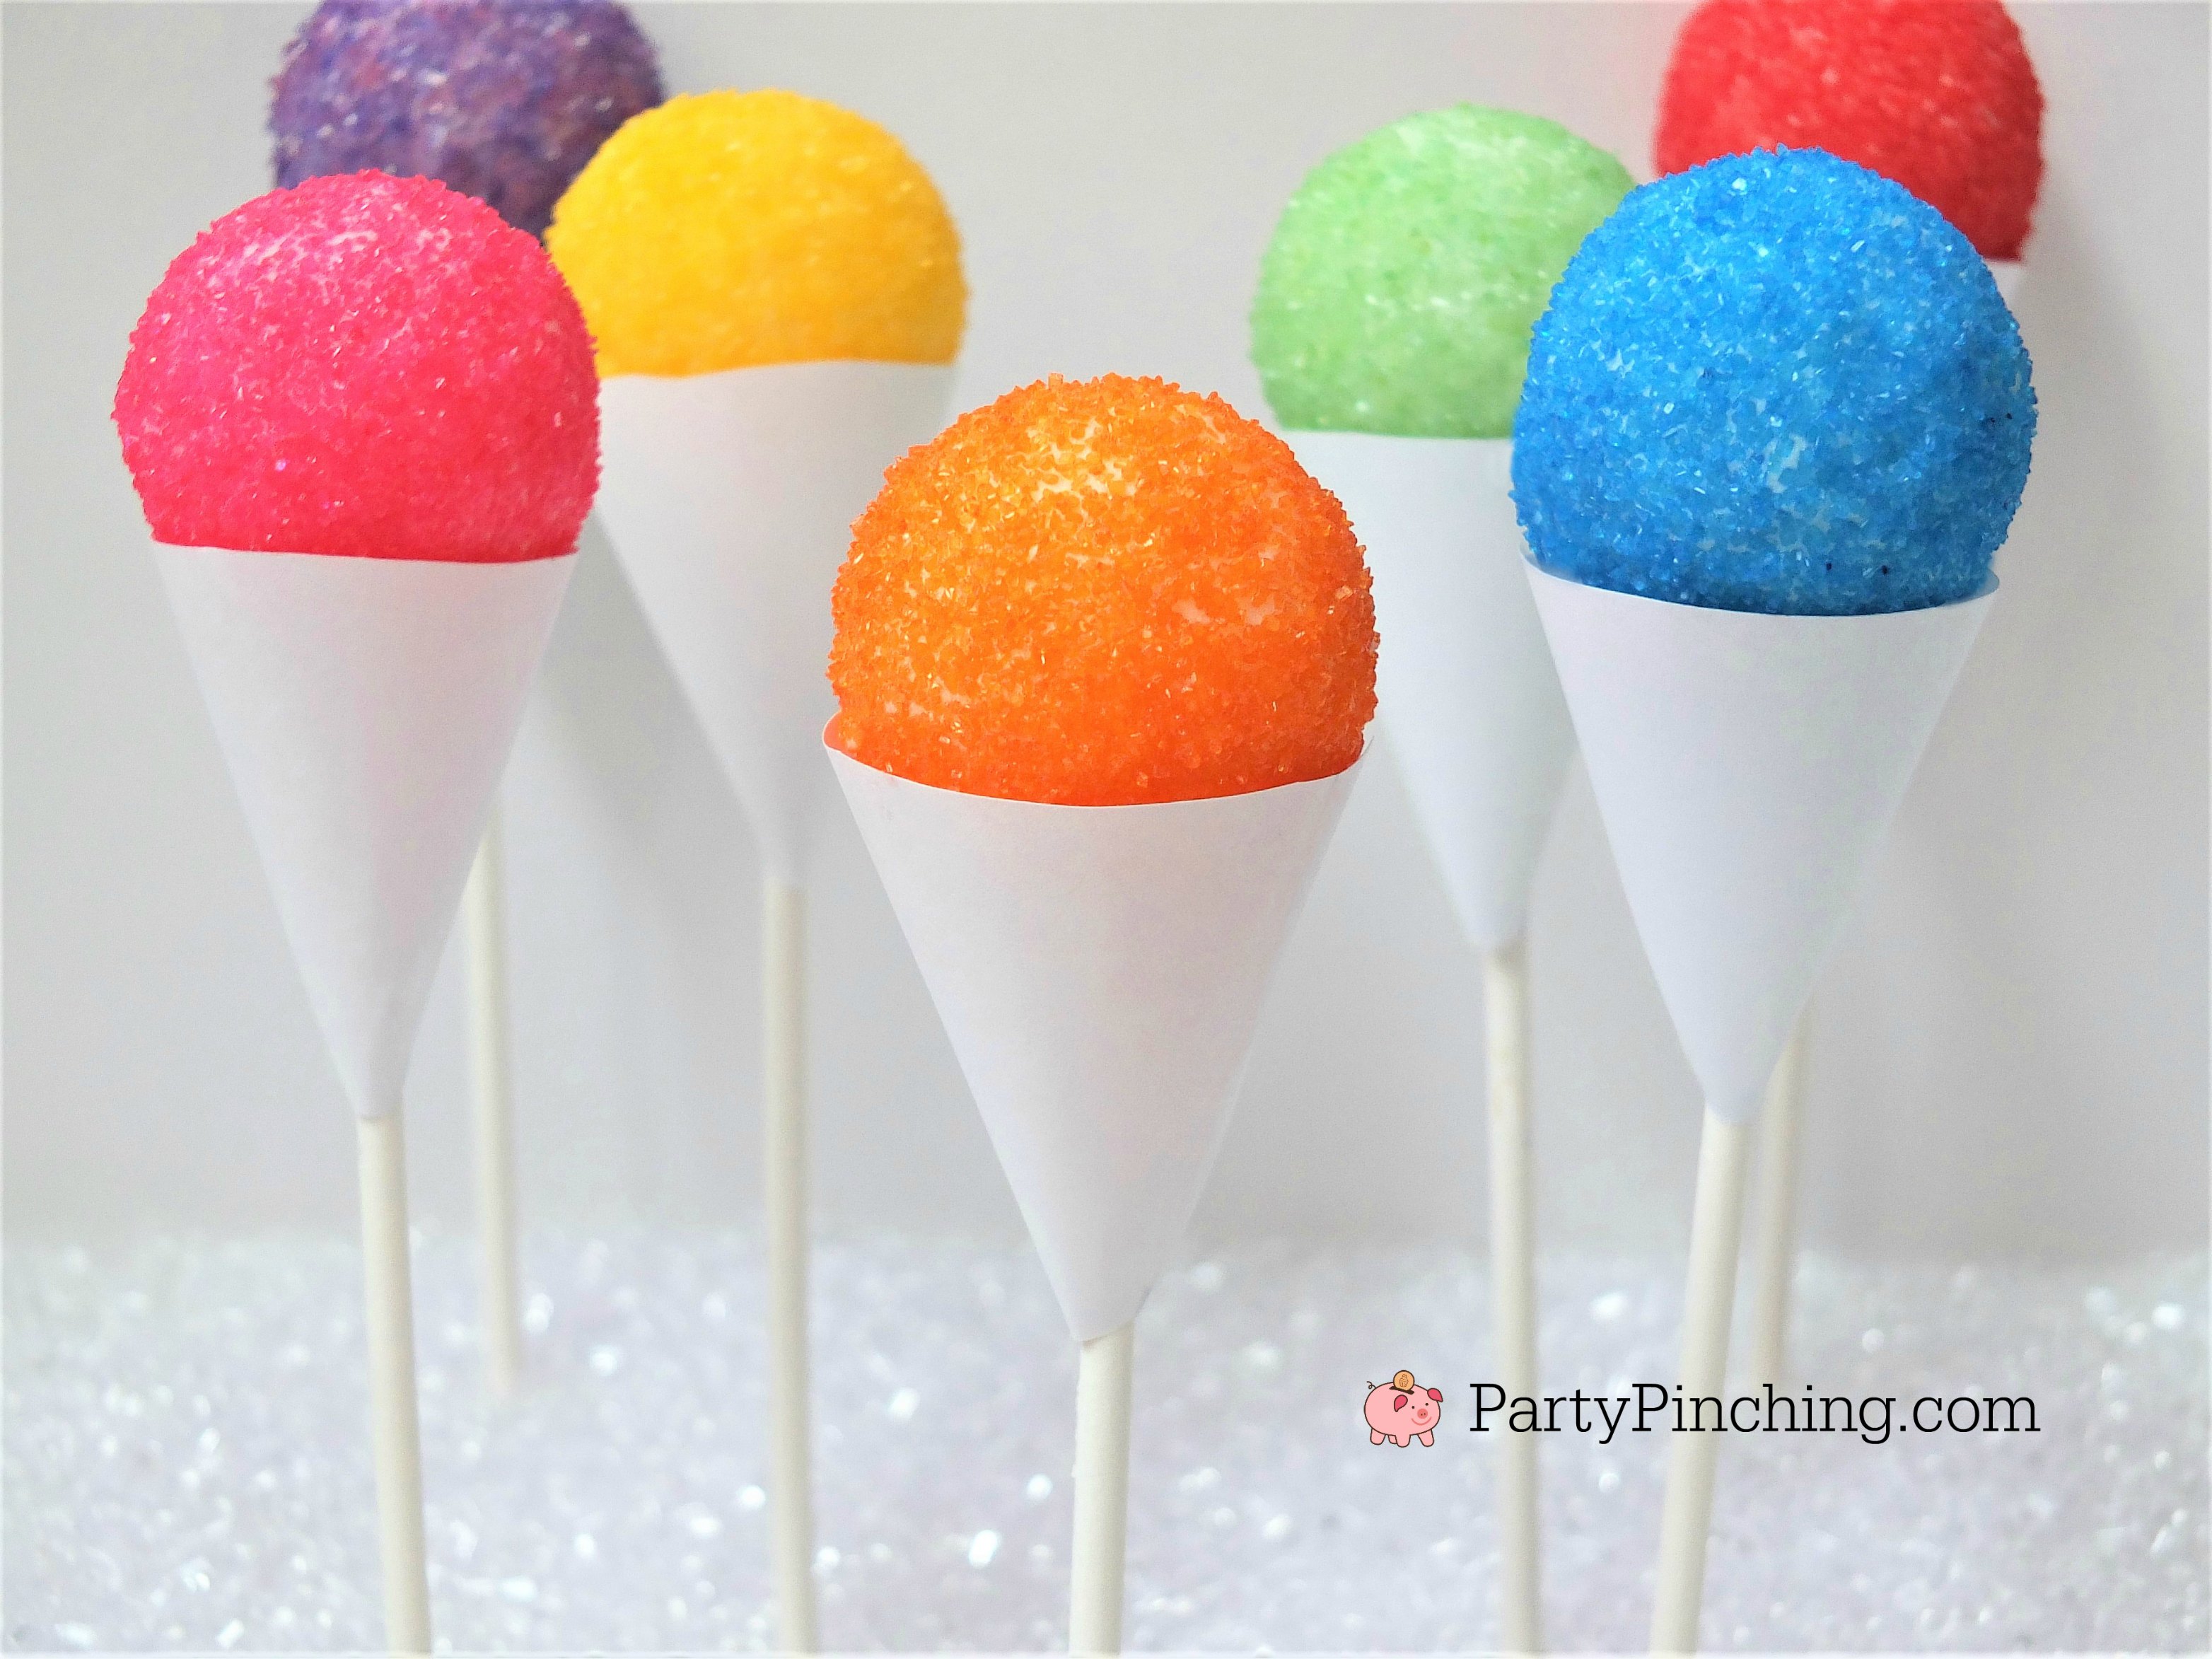 snow cone cake pops, cute summer desserts, sno cone fair cupcake cake pops, easy snow cone treat, summer kid friendly treat, summer theme party ideas, no bake cake pops, partypinching.com